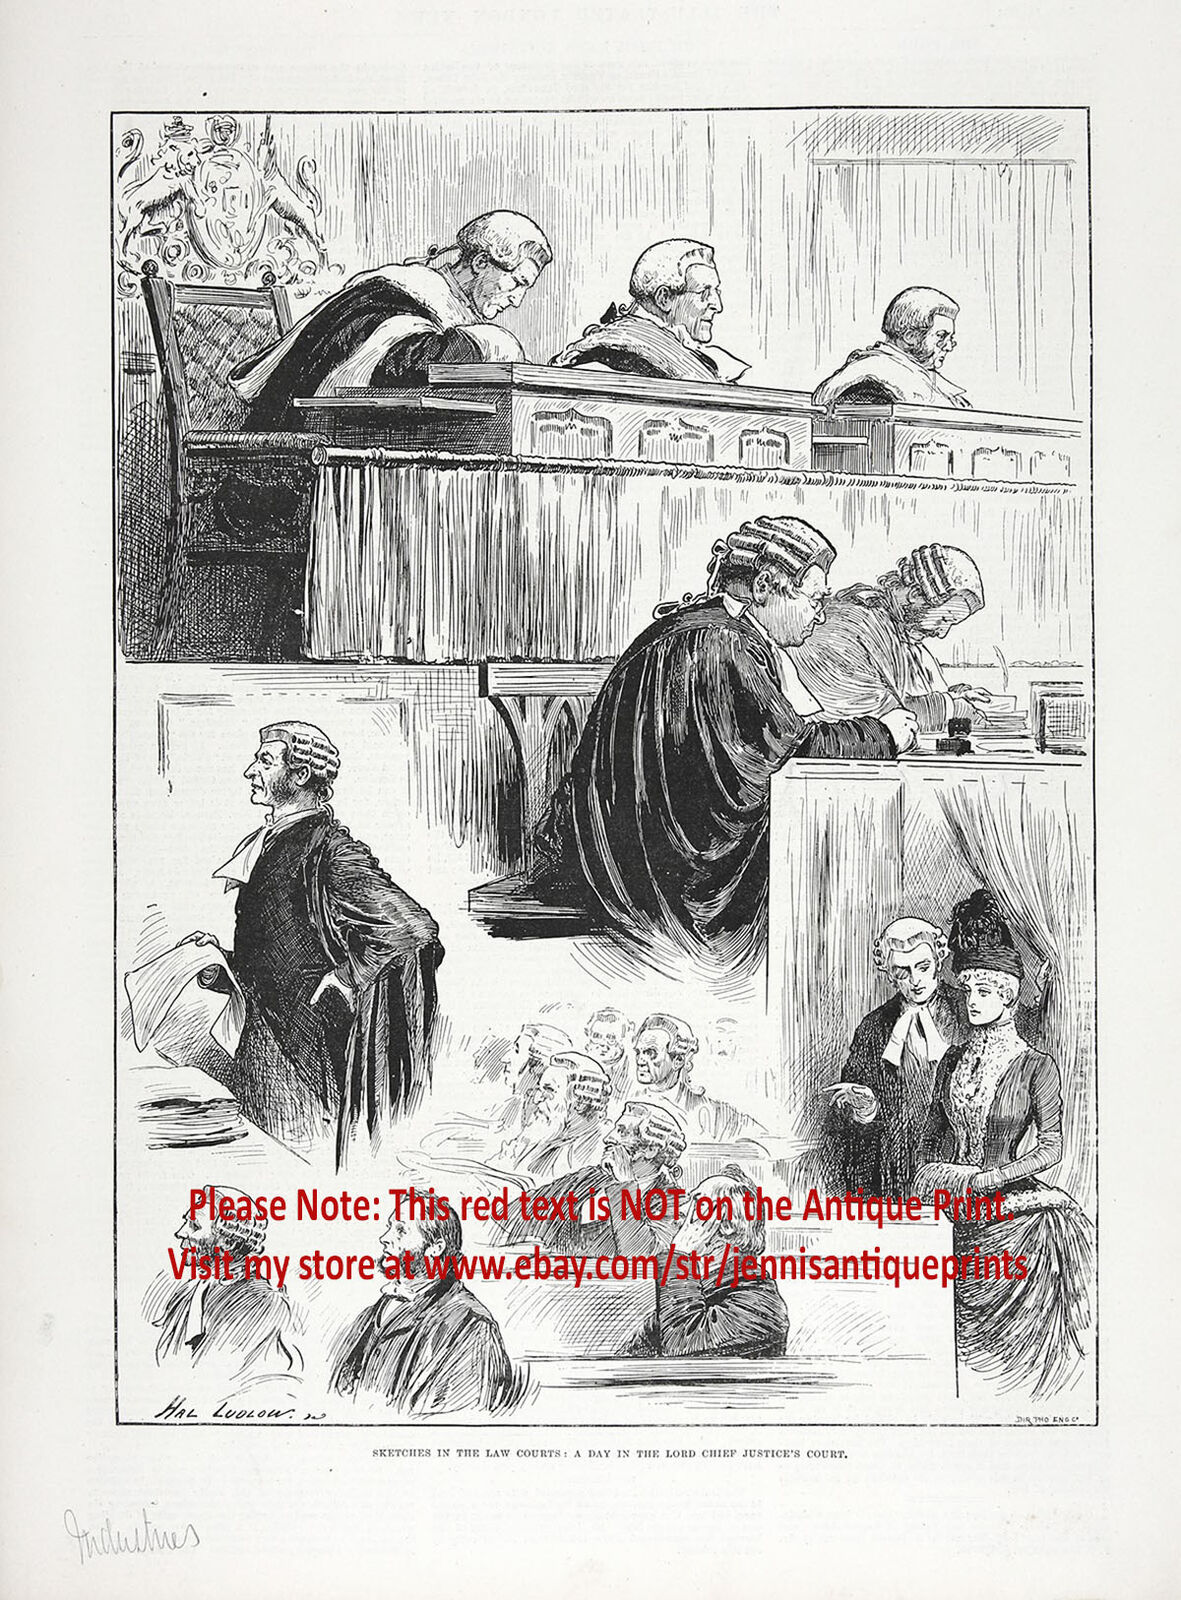 Lord Chief Justice Court Judge Barrister, Large 1880s Antique Print & Article